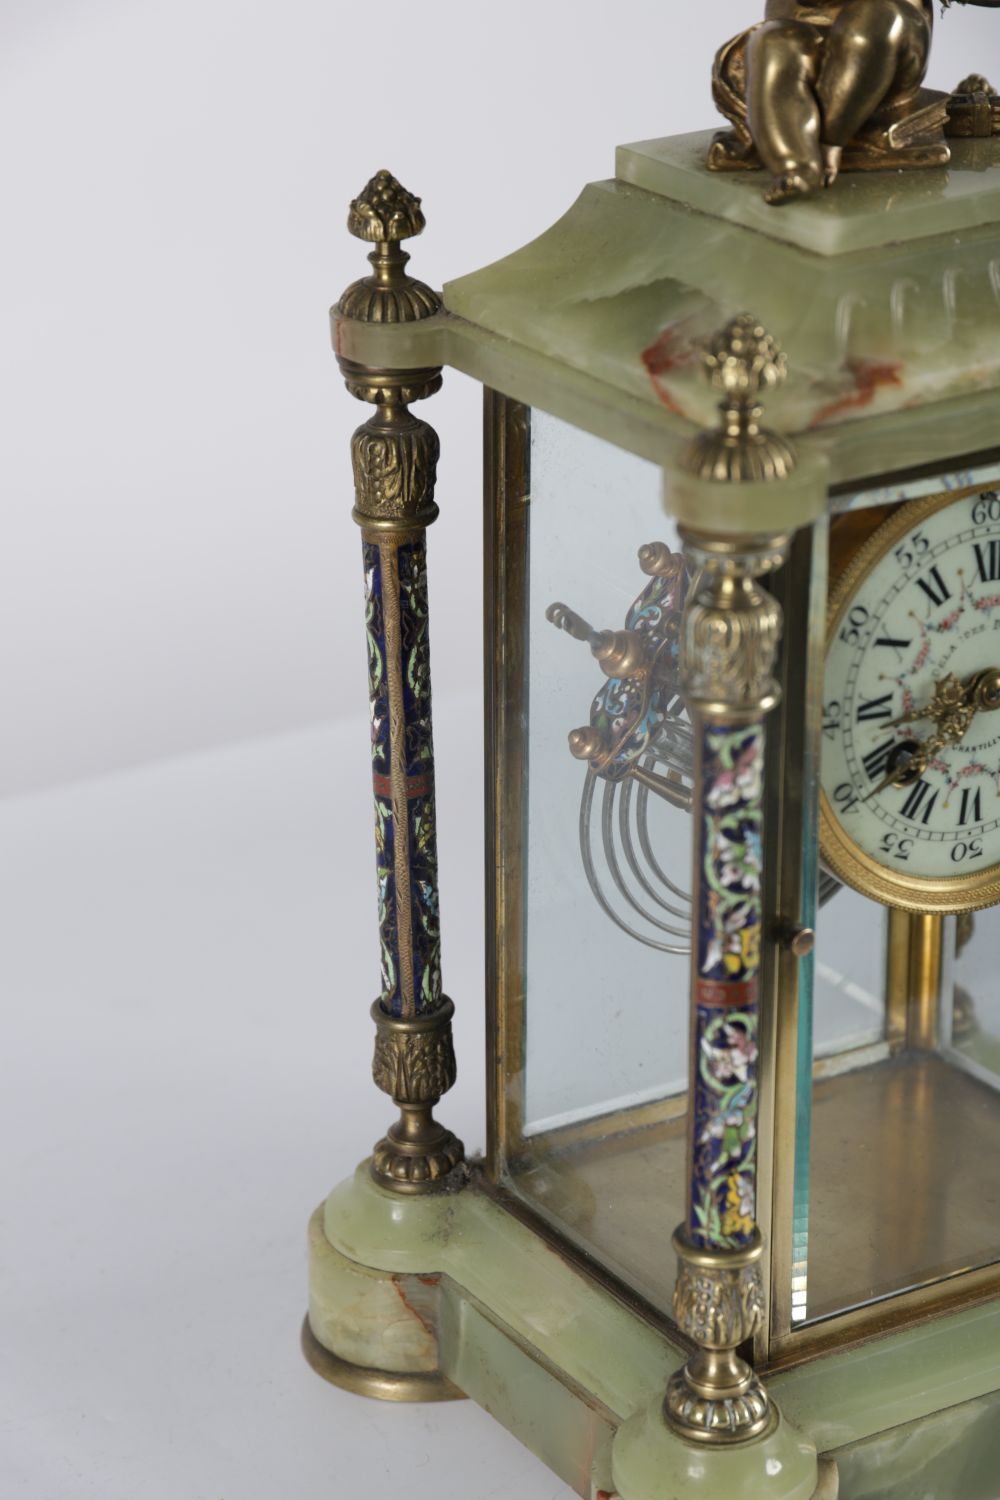 19TH-CENTURY FRENCH CHAMPLEVE ENAMELLED CLOCK - Image 3 of 4